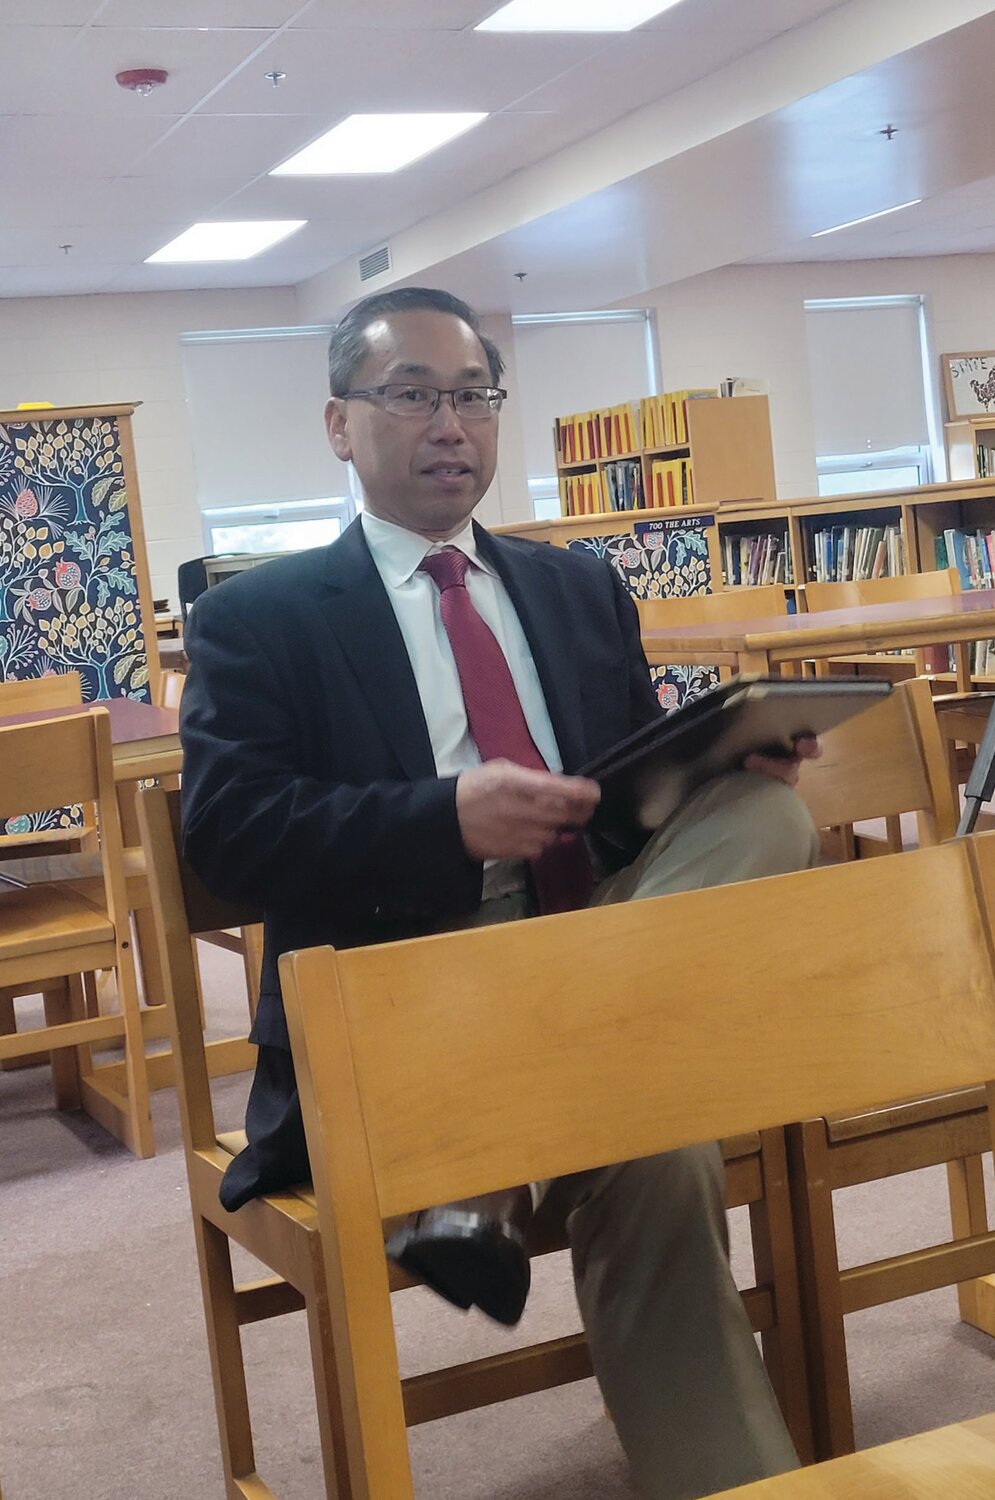 ATTORNEY-CLIENT PRIVILEGE: Polisena has enlisted attorney and former Cranston Mayor Allan W. Fung to represent the town in the matter. The school committee has also hired a lawyer.